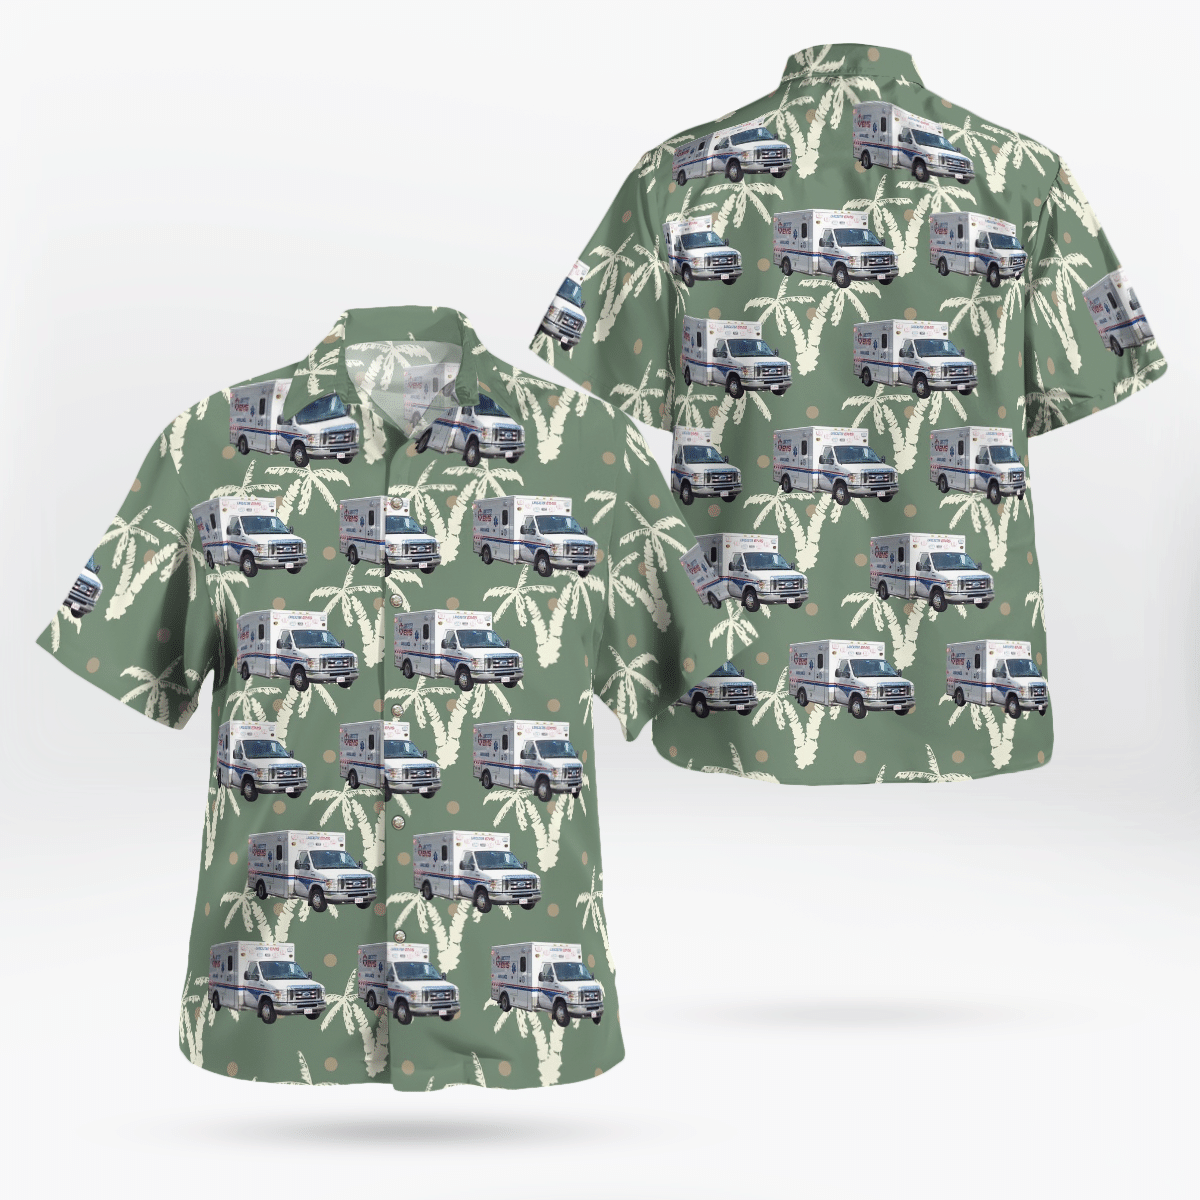 If you are in need of a new summertime look, pick up this Hawaiian shirt 147